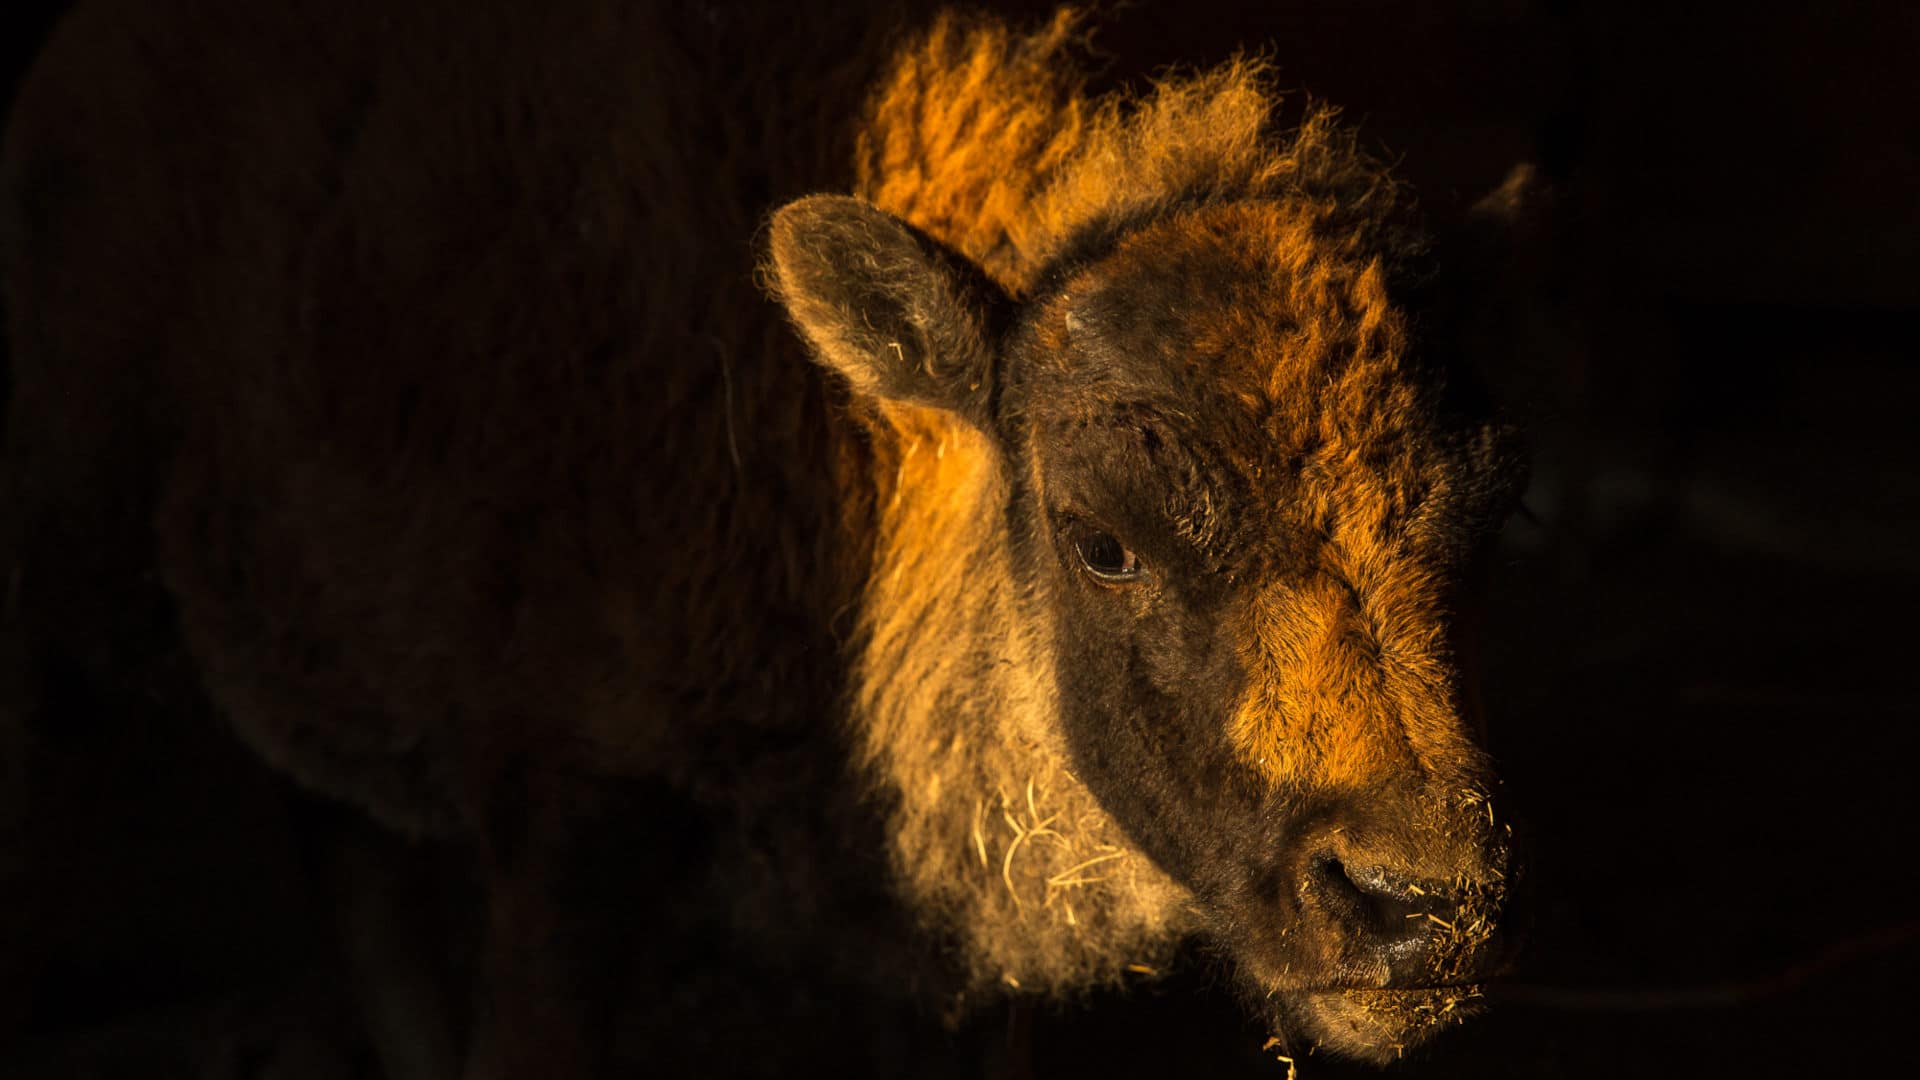 This bison calf, standing in the doorway of a barn on the Blackfeet Reservation, is a symbol of hope for the Blackfoot people.  All visuals by LOUISE JOHNS for UNDARK